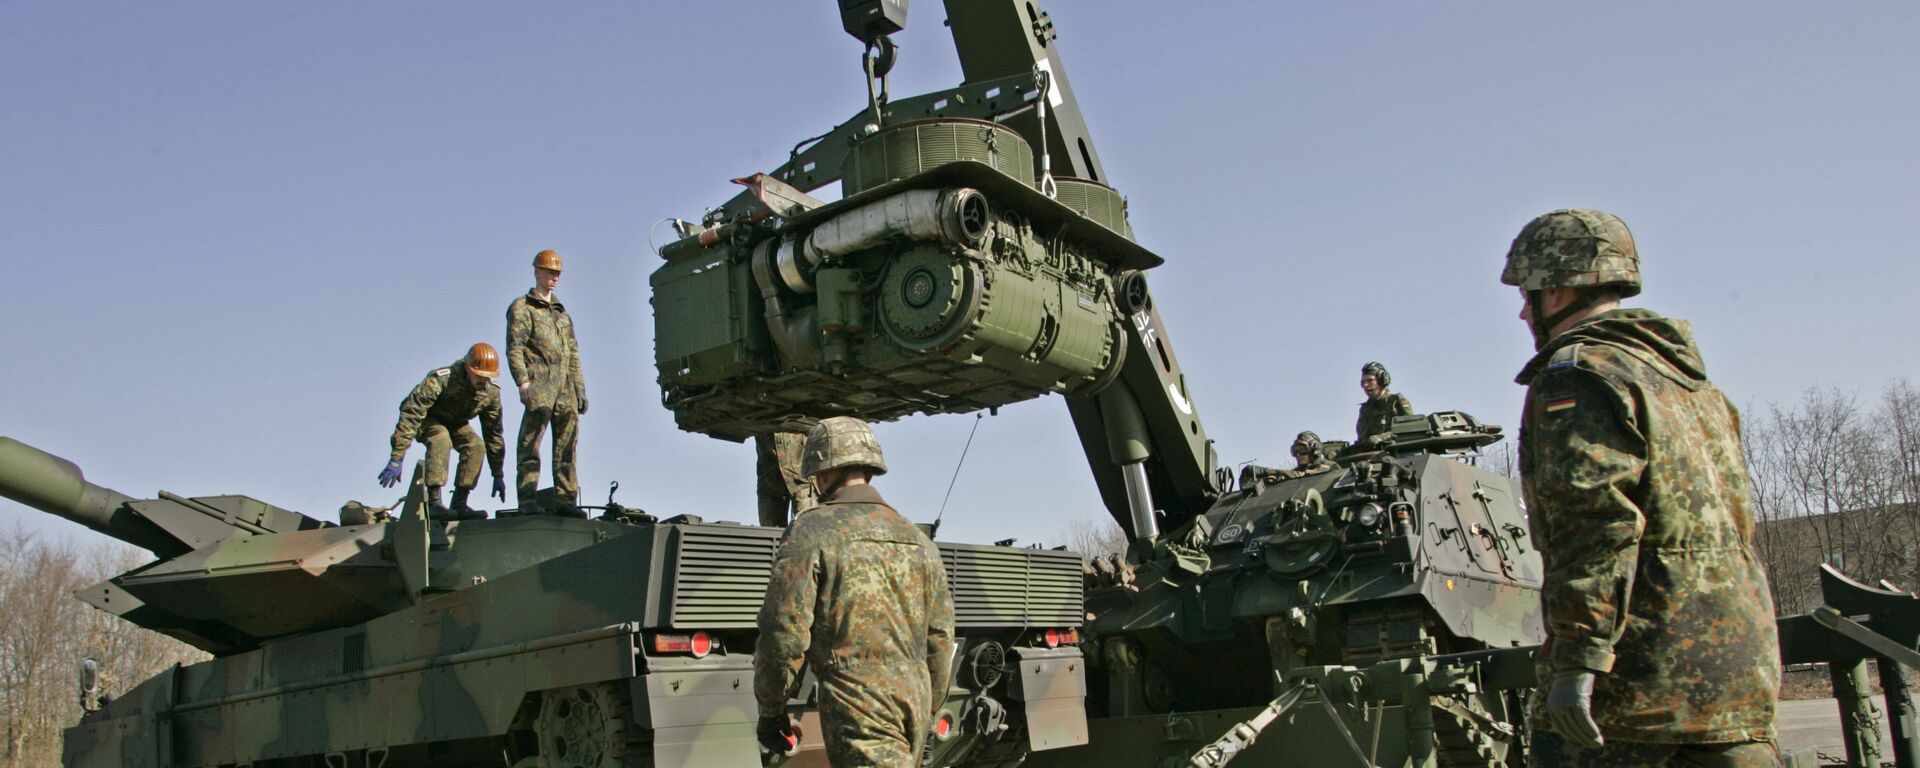 The crew of a 'Buffalo' wrecker tank, right, of the German Army lifts the engine of a Leopard 2 battle tank, left, for repair during a demonstration at the Bayern Barracks in Munich, southern Germany, on Wednesday, Feb. 20, 2008 - Sputnik International, 1920, 15.01.2023